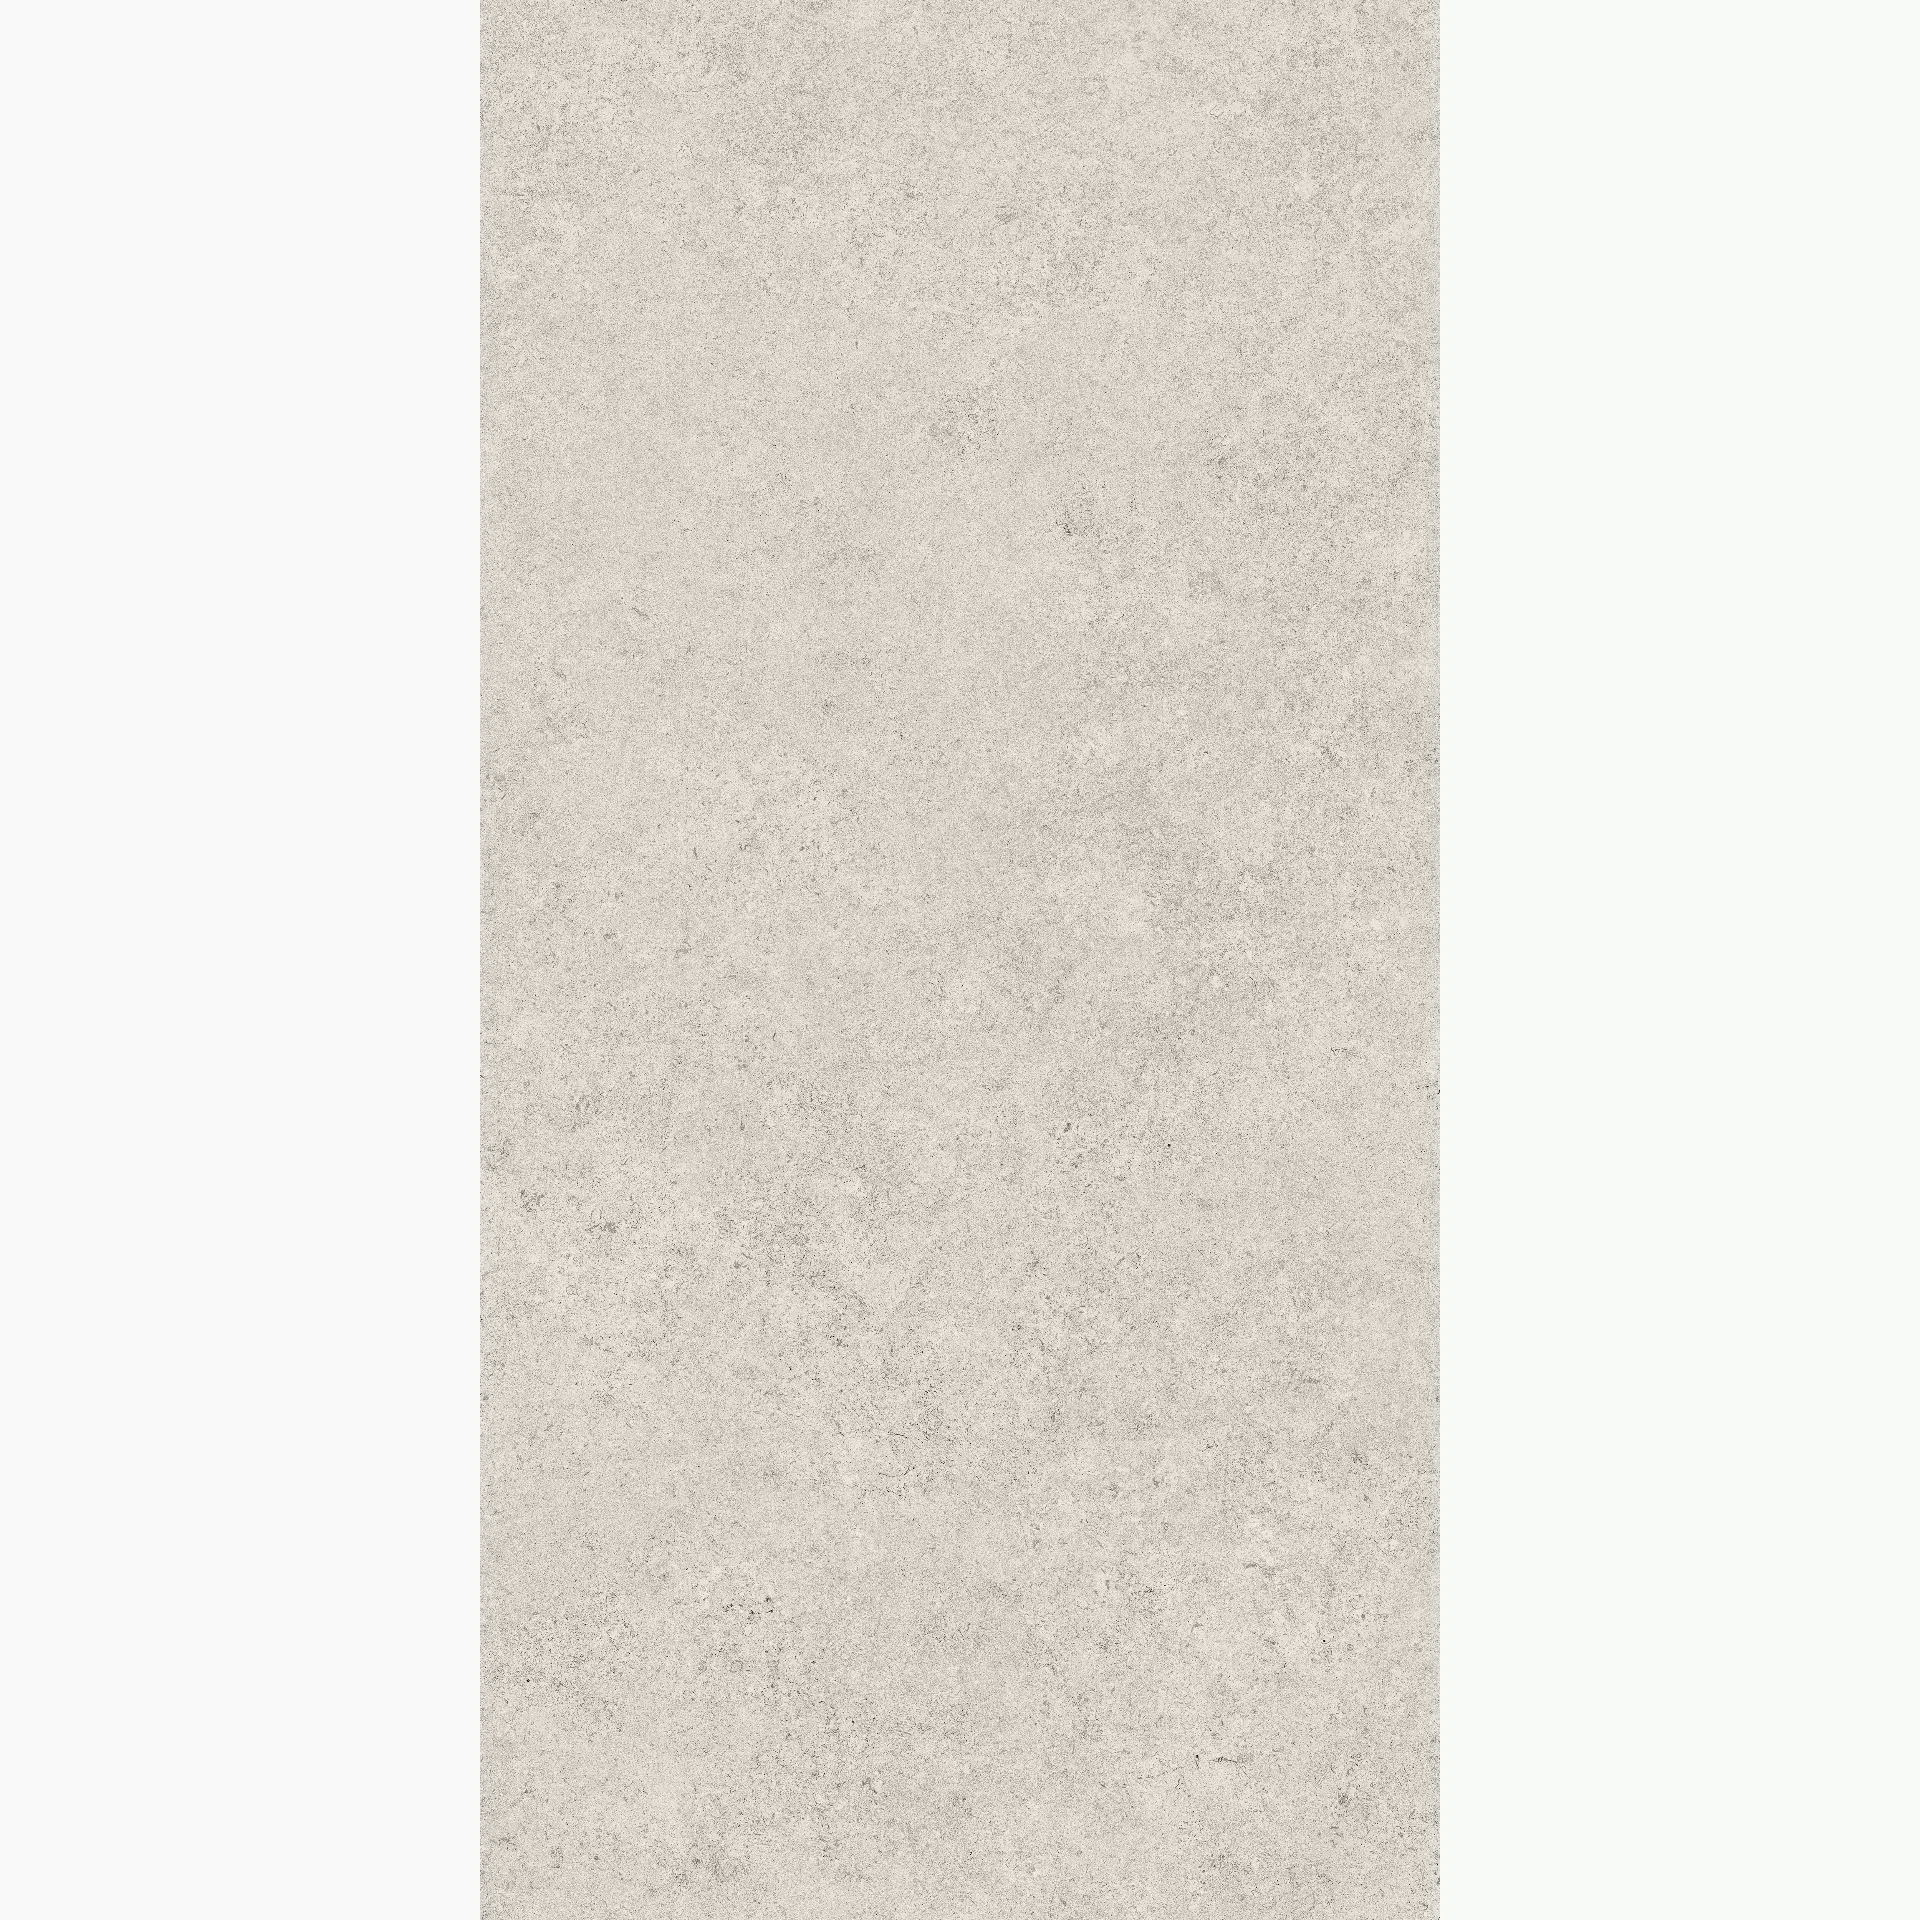 Cottodeste Pura Pearl Hammered Protect EGXPR70 60x120cm rectified 20mm